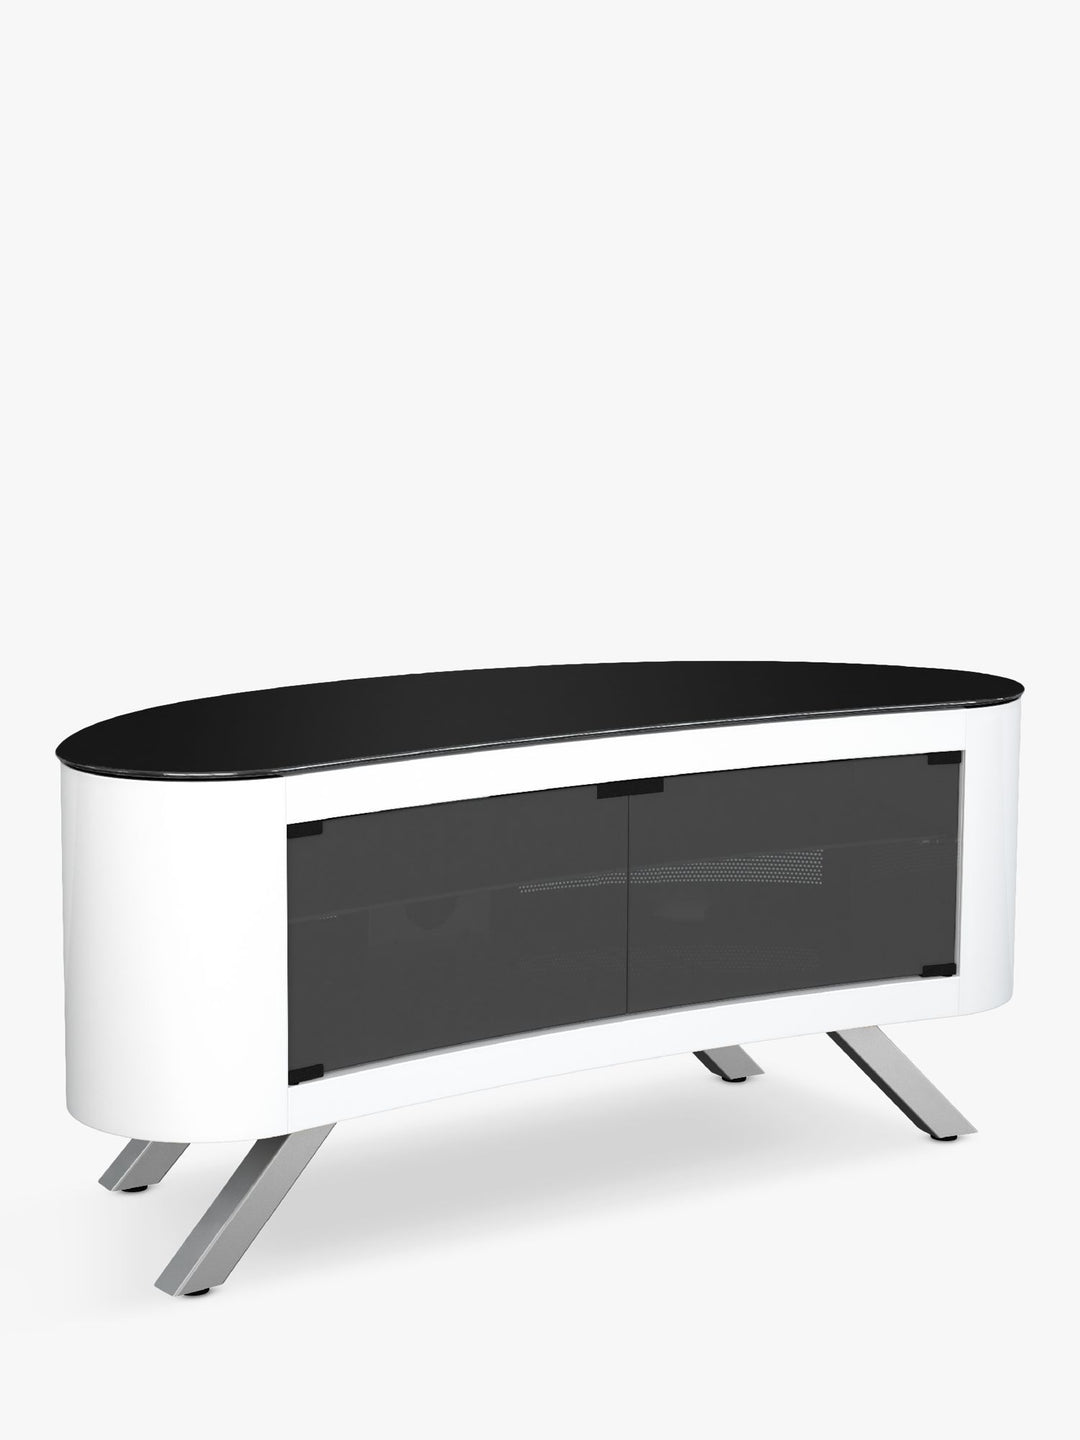 AVF Affinity Premium 1150 Bay Curved TV Stand For TVs Up To 55", Gloss White